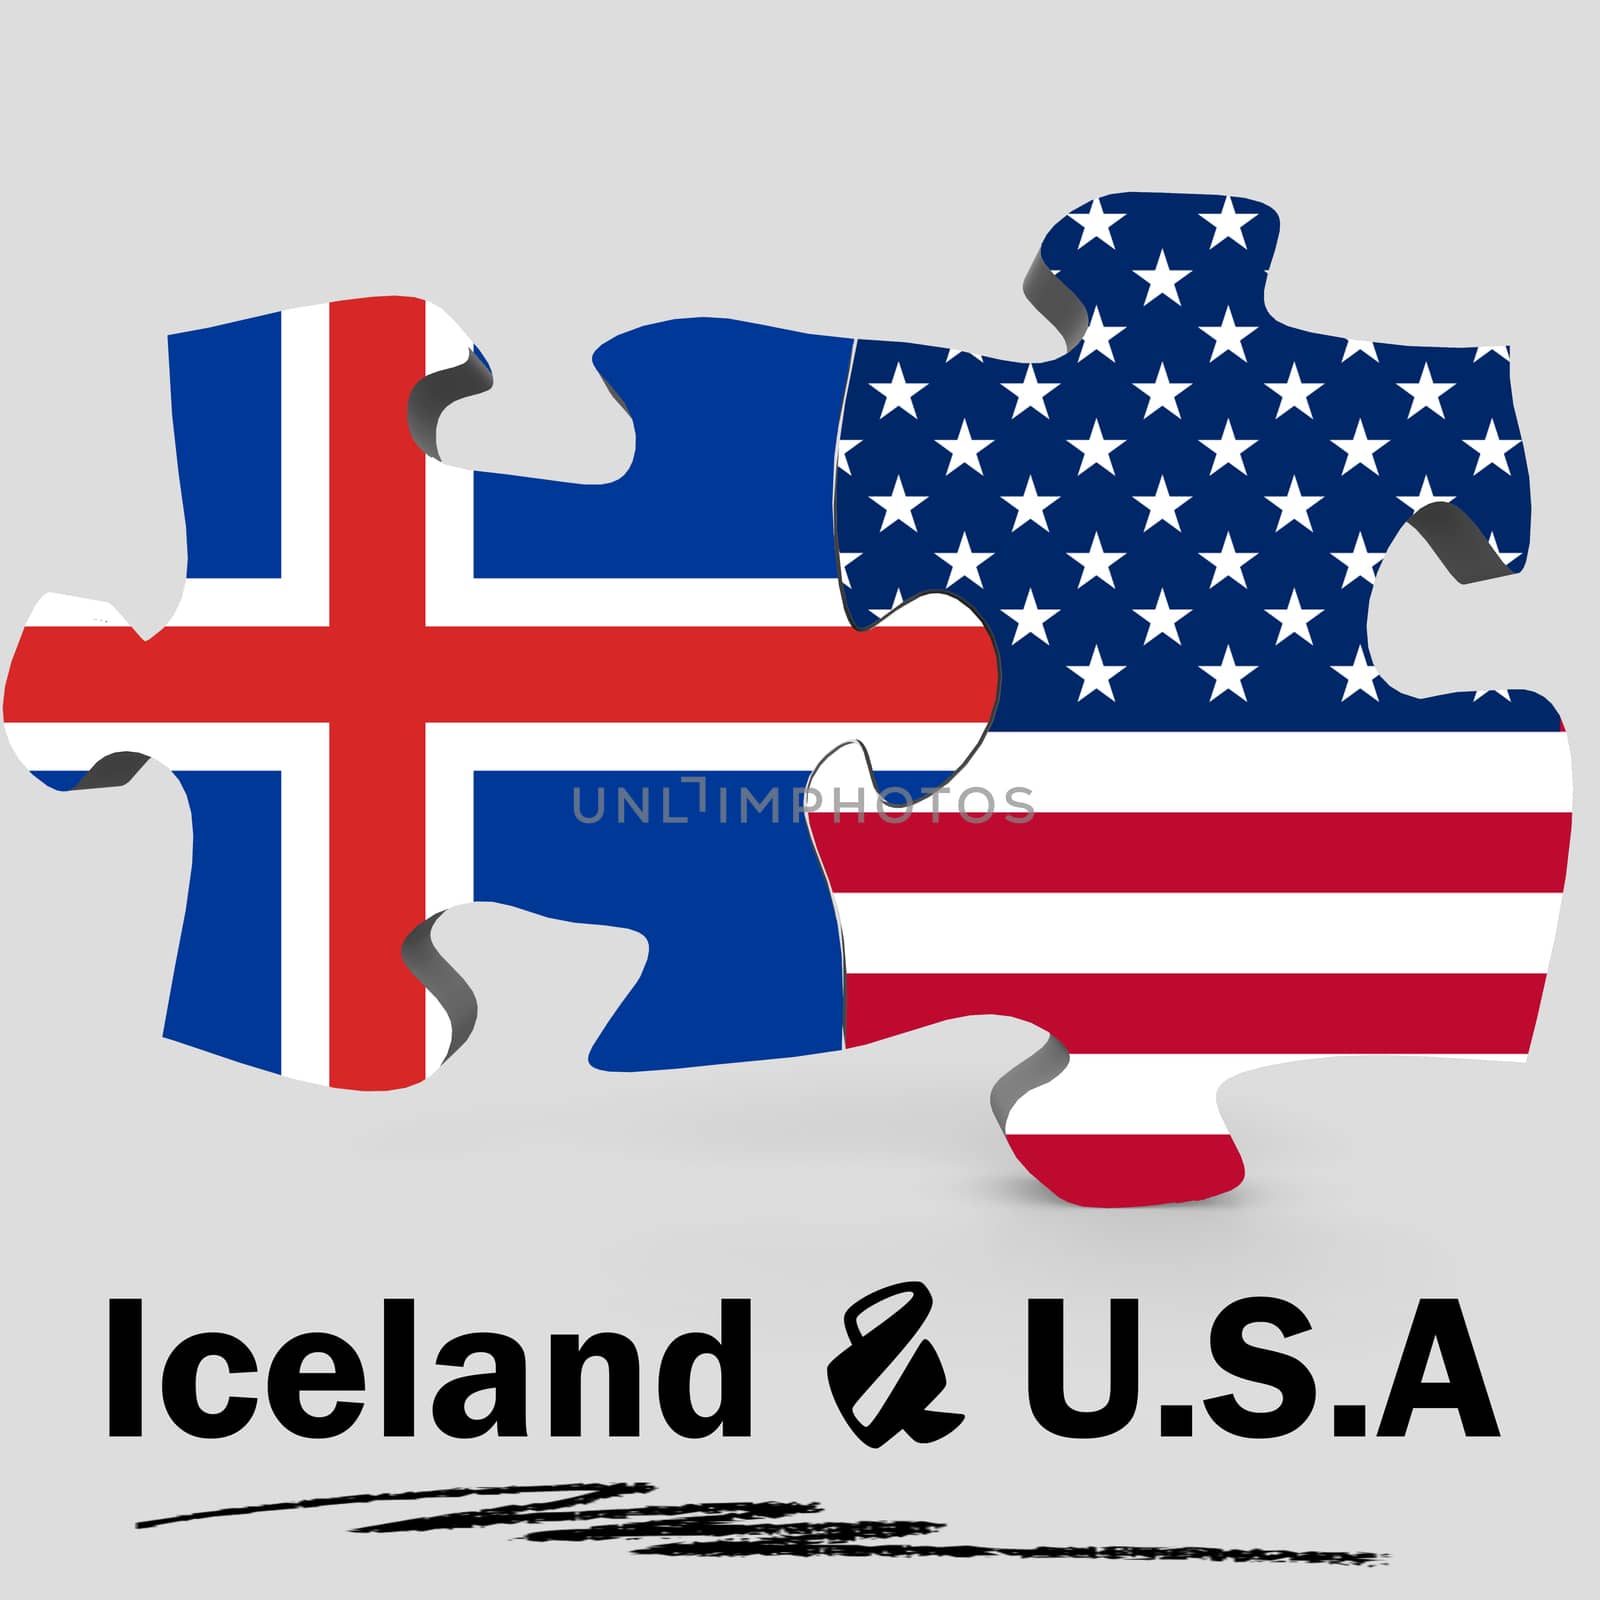 USA and Iceland Flags in puzzle isolated on white background, 3D rendering